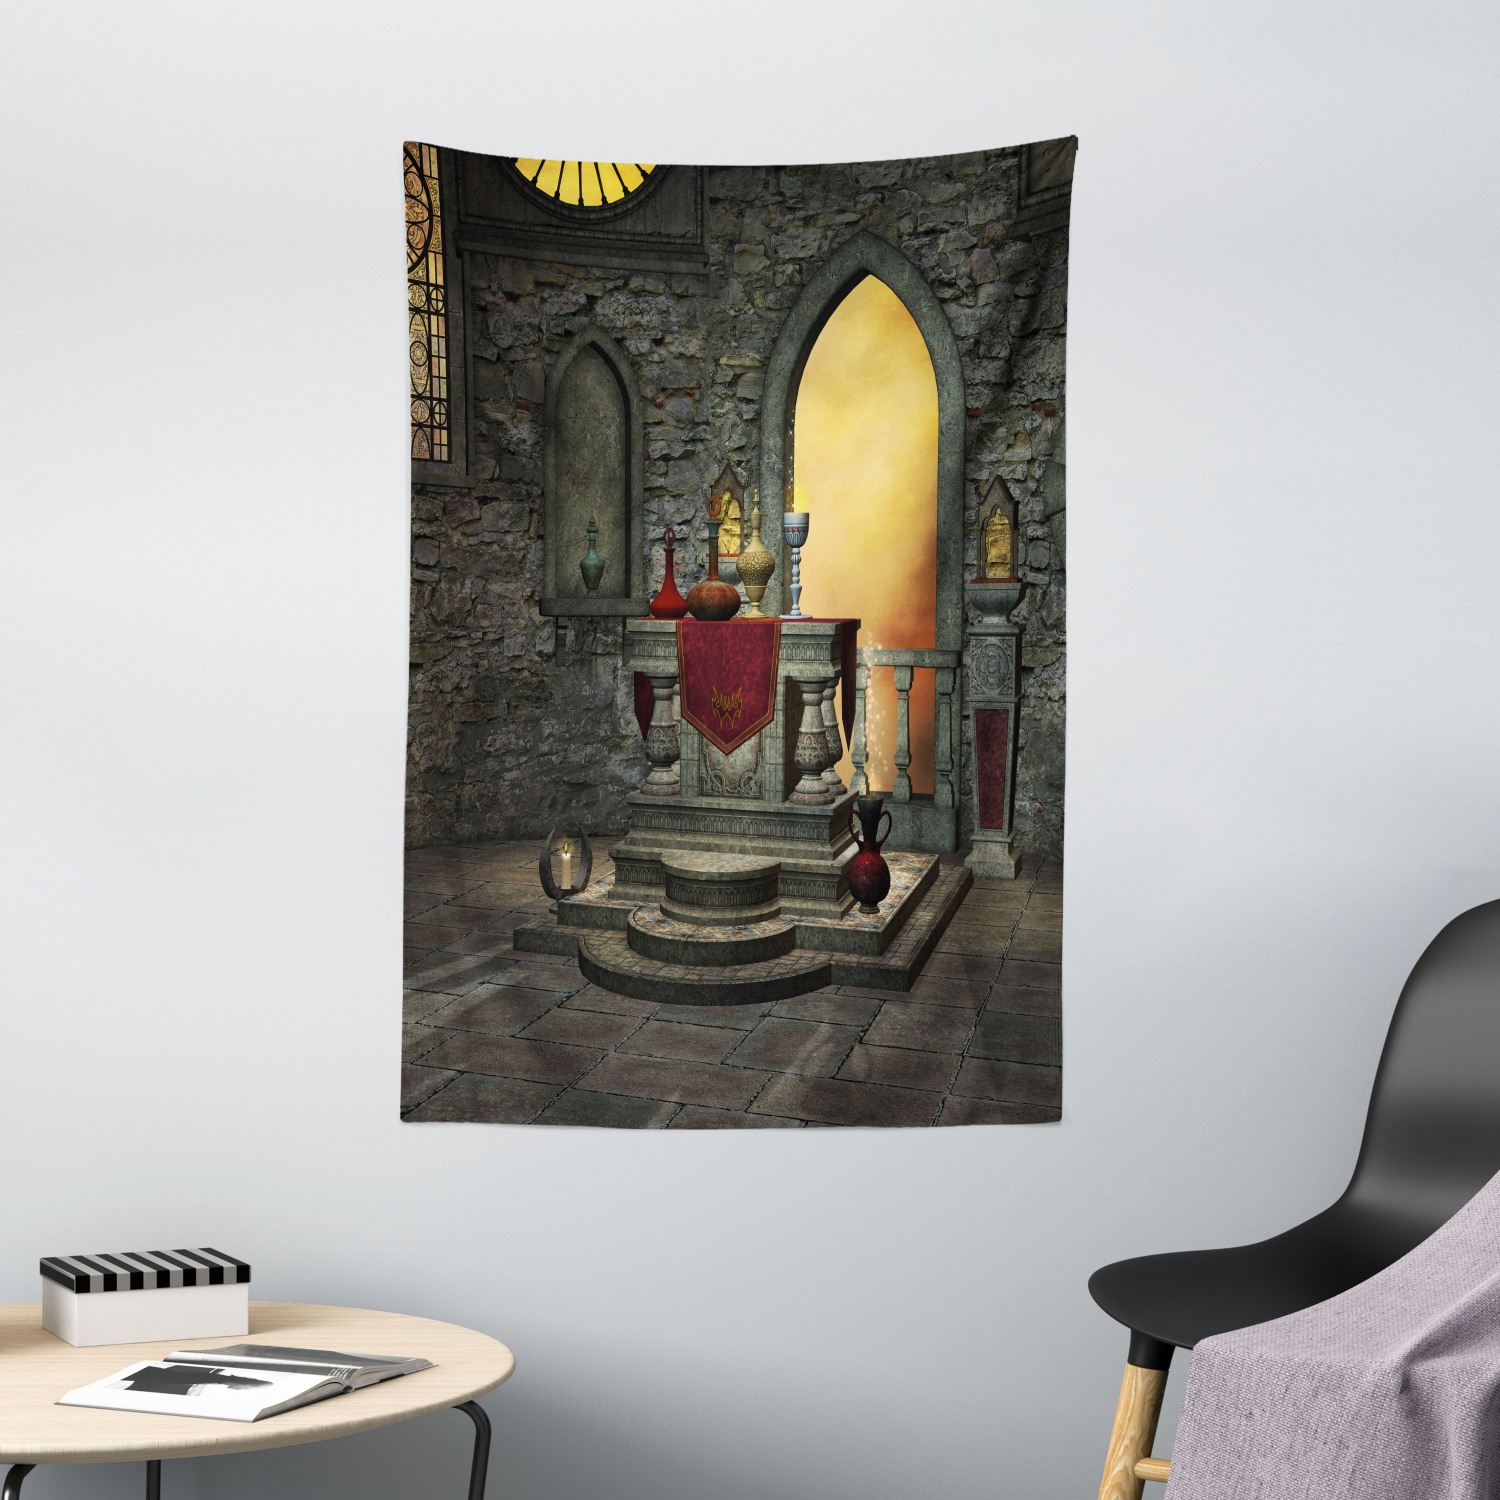 Gothic Tapestry Ancient Holy Altar Print Wall Hanging Decor 60Wx40L Inches 